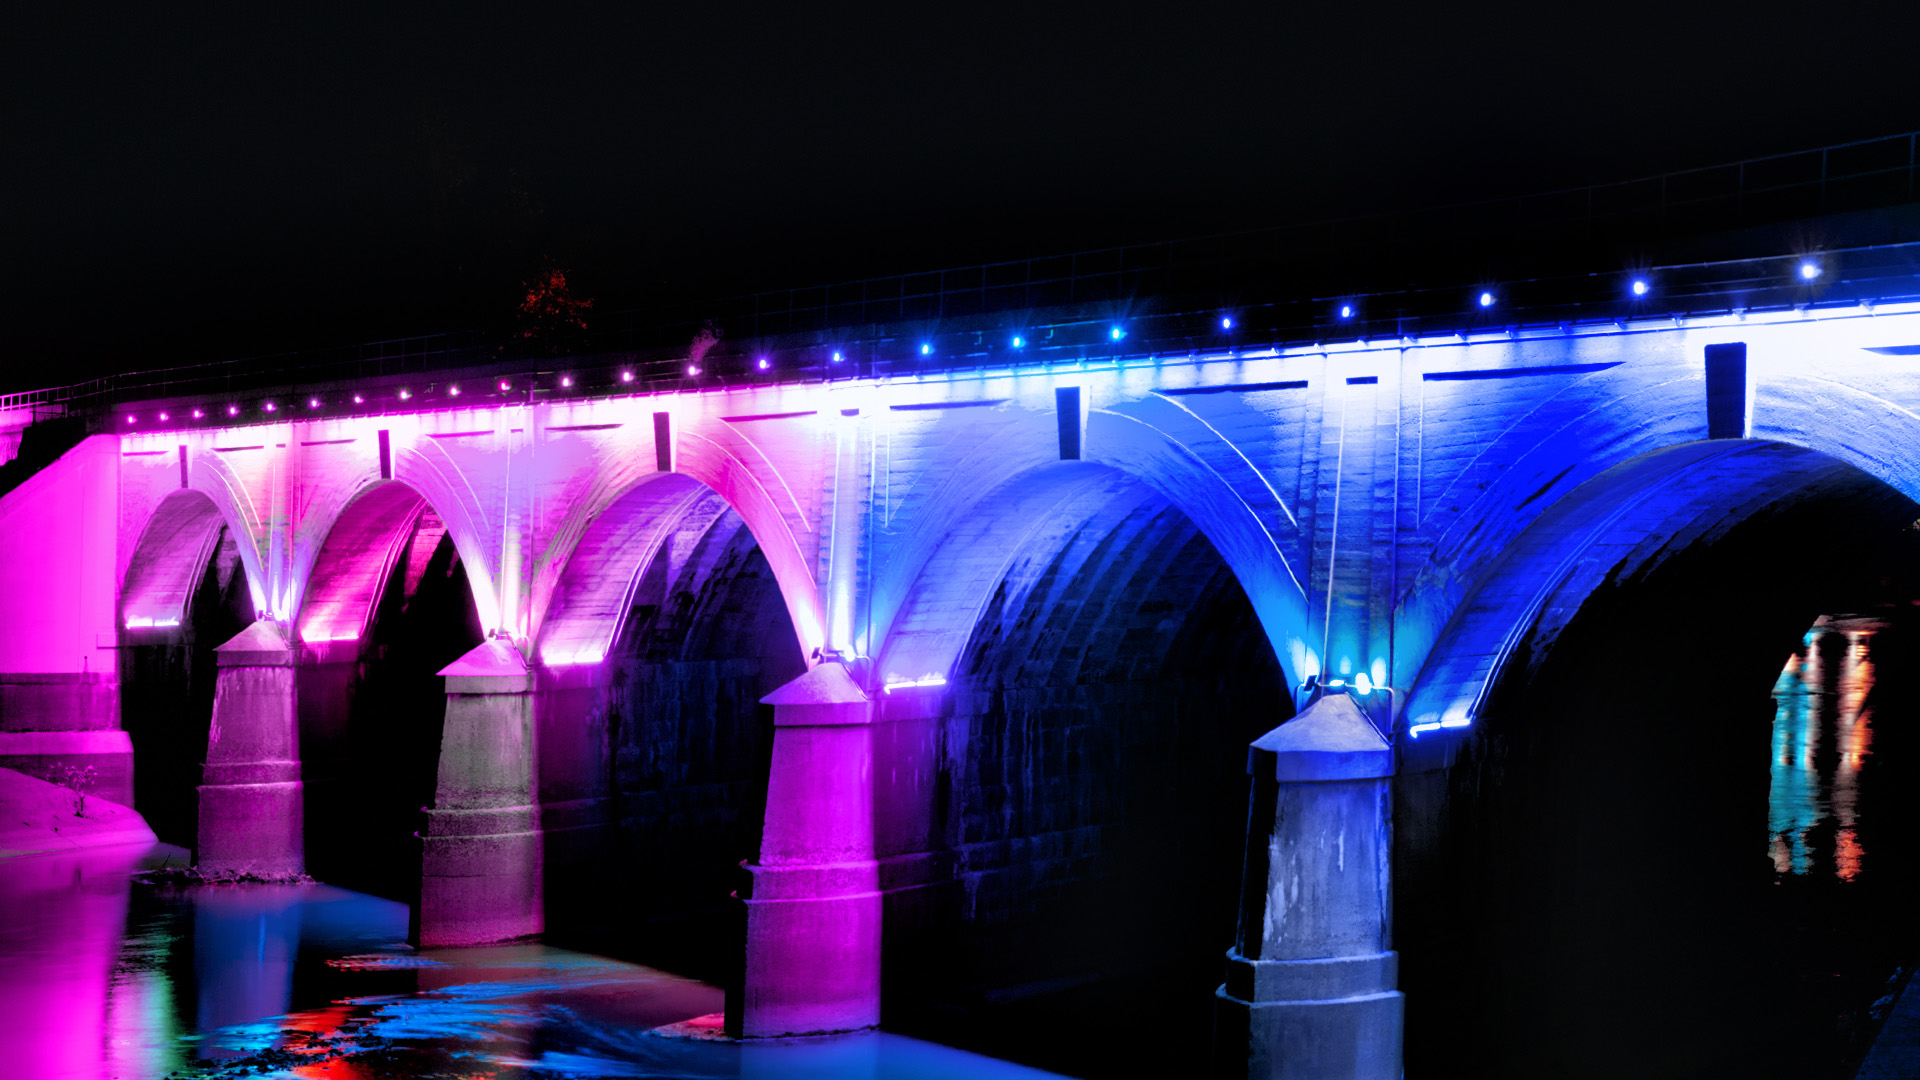 A bridge over water, shinning in neon purple and blue colours.